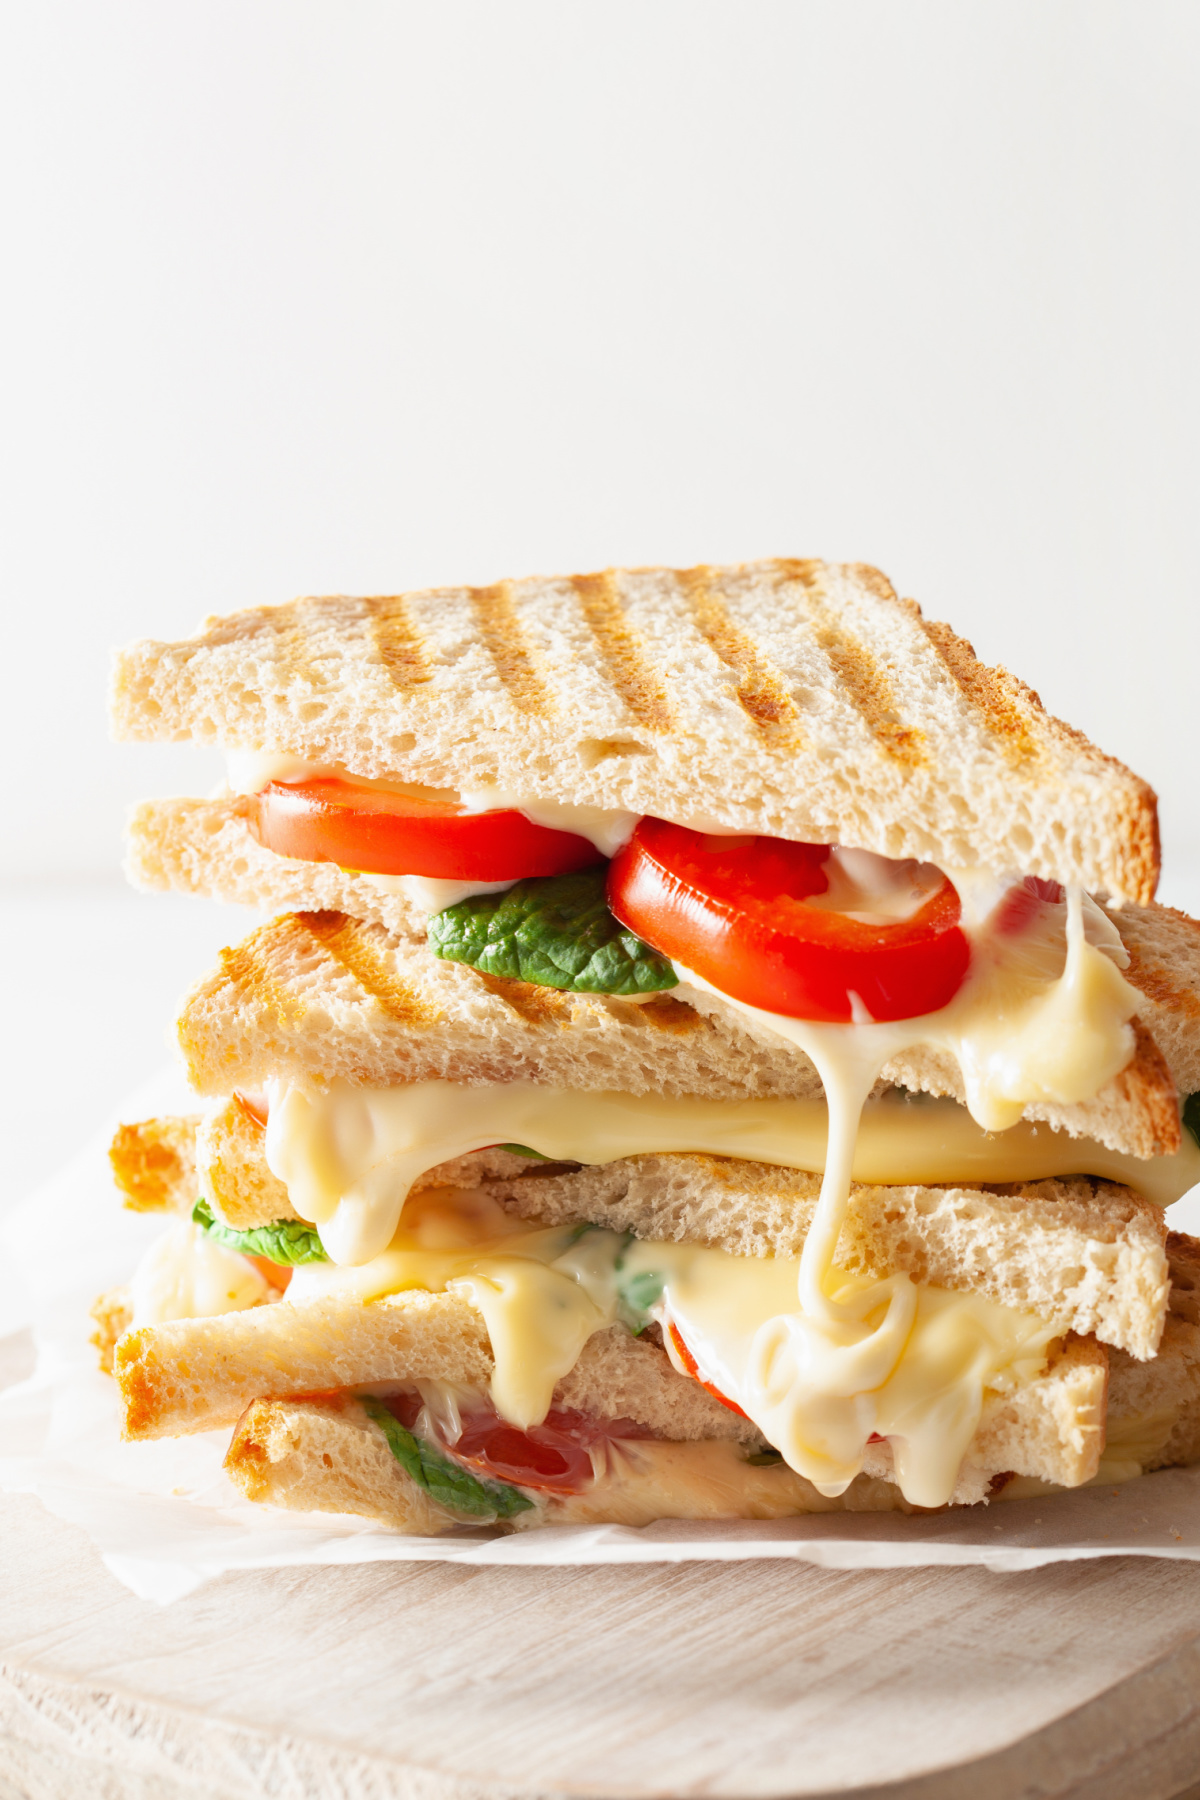 A grilled cheese sandwich with tomato and lettuce.